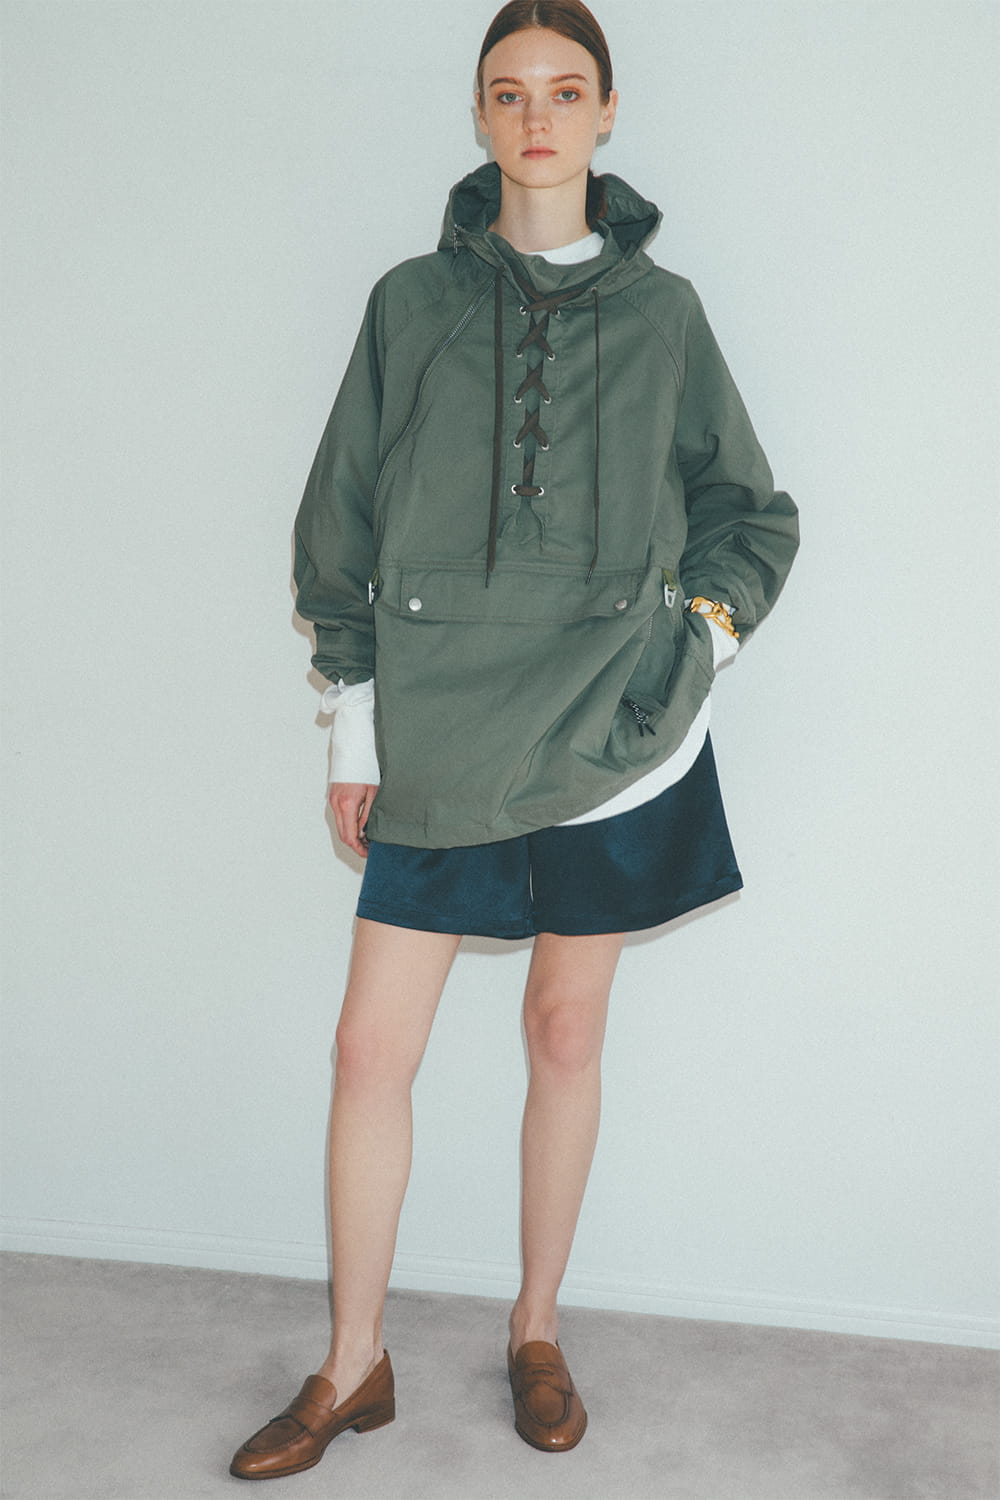 Whim Gazette SELECTED ITEMS ISSUE Vol.2 【NEW ADDITION】 | ウィム 